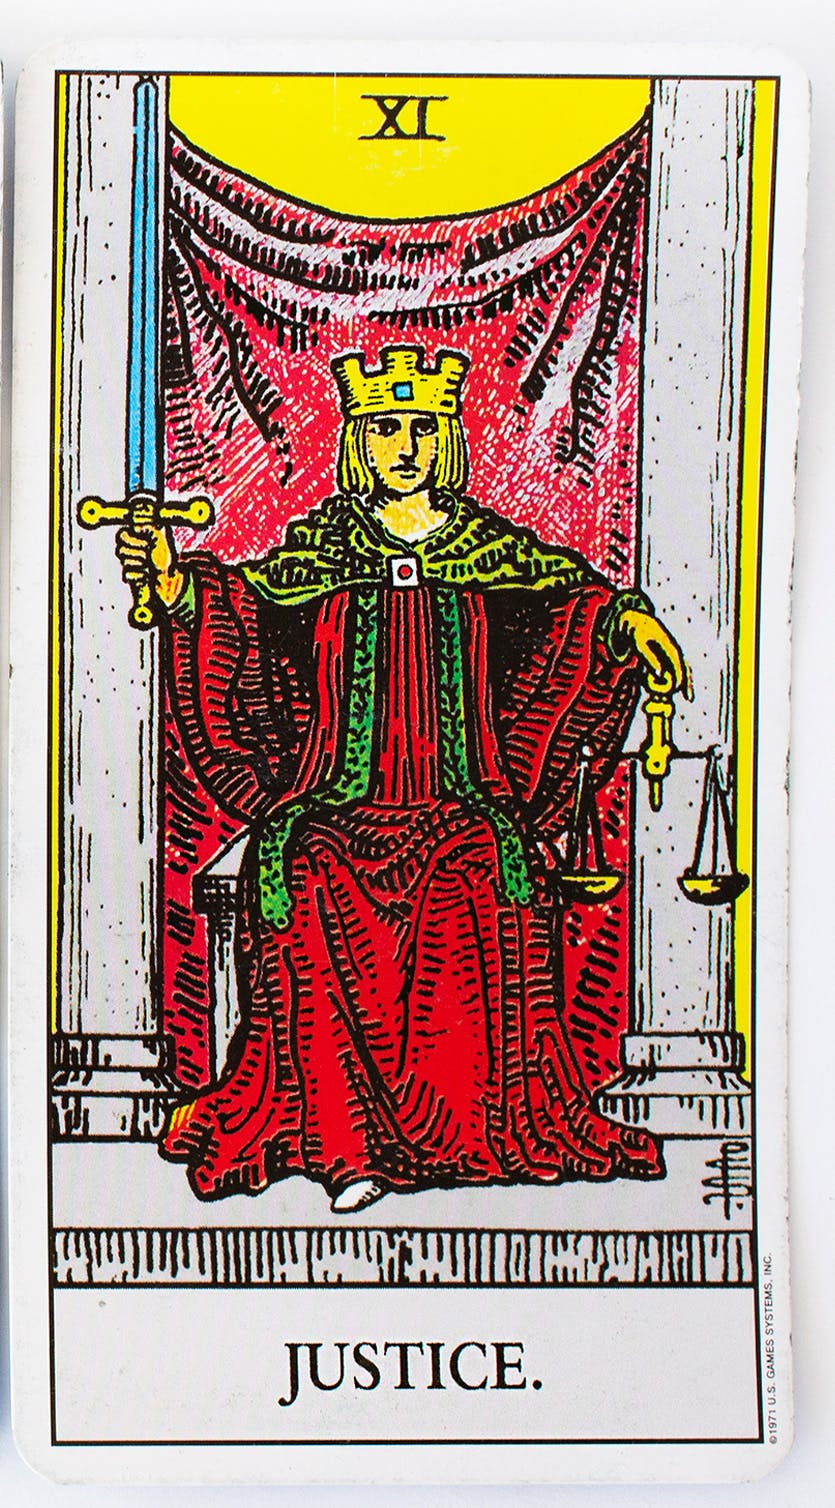 The justice card from the rider-waite deck. Features an image of a person sitting in a throne wearing a red robe and a crown, holding a set of scales in one hand and a sword in the other.